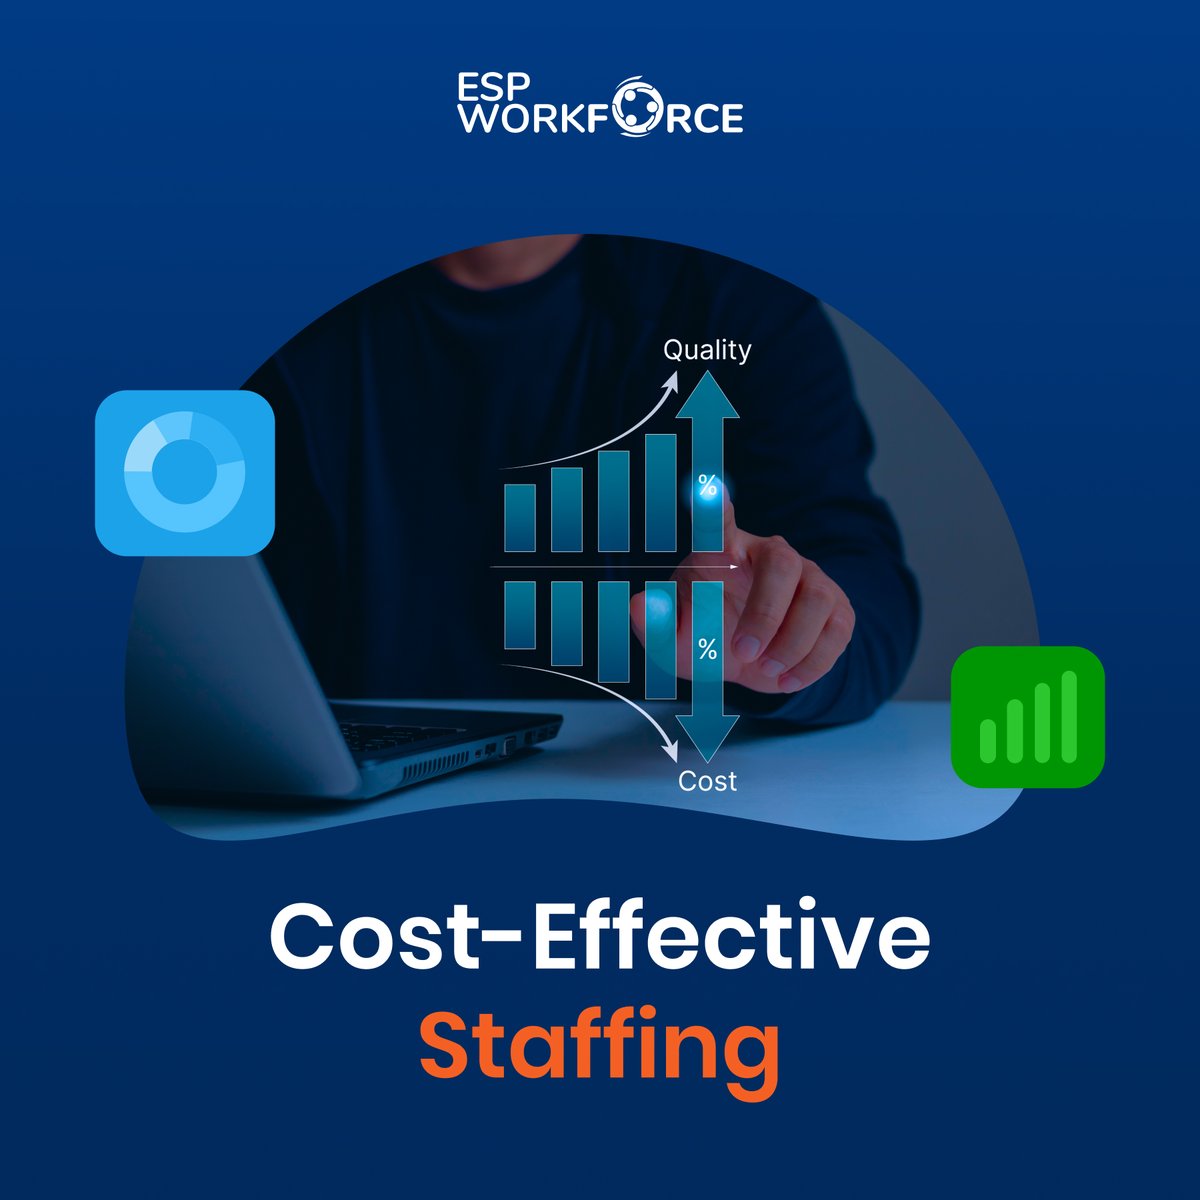 Cut costs without sacrificing quality – virtual staffing solutions make it possible.

#costeffectivehiring #virtualhiring #espvirtualstaffingsolution